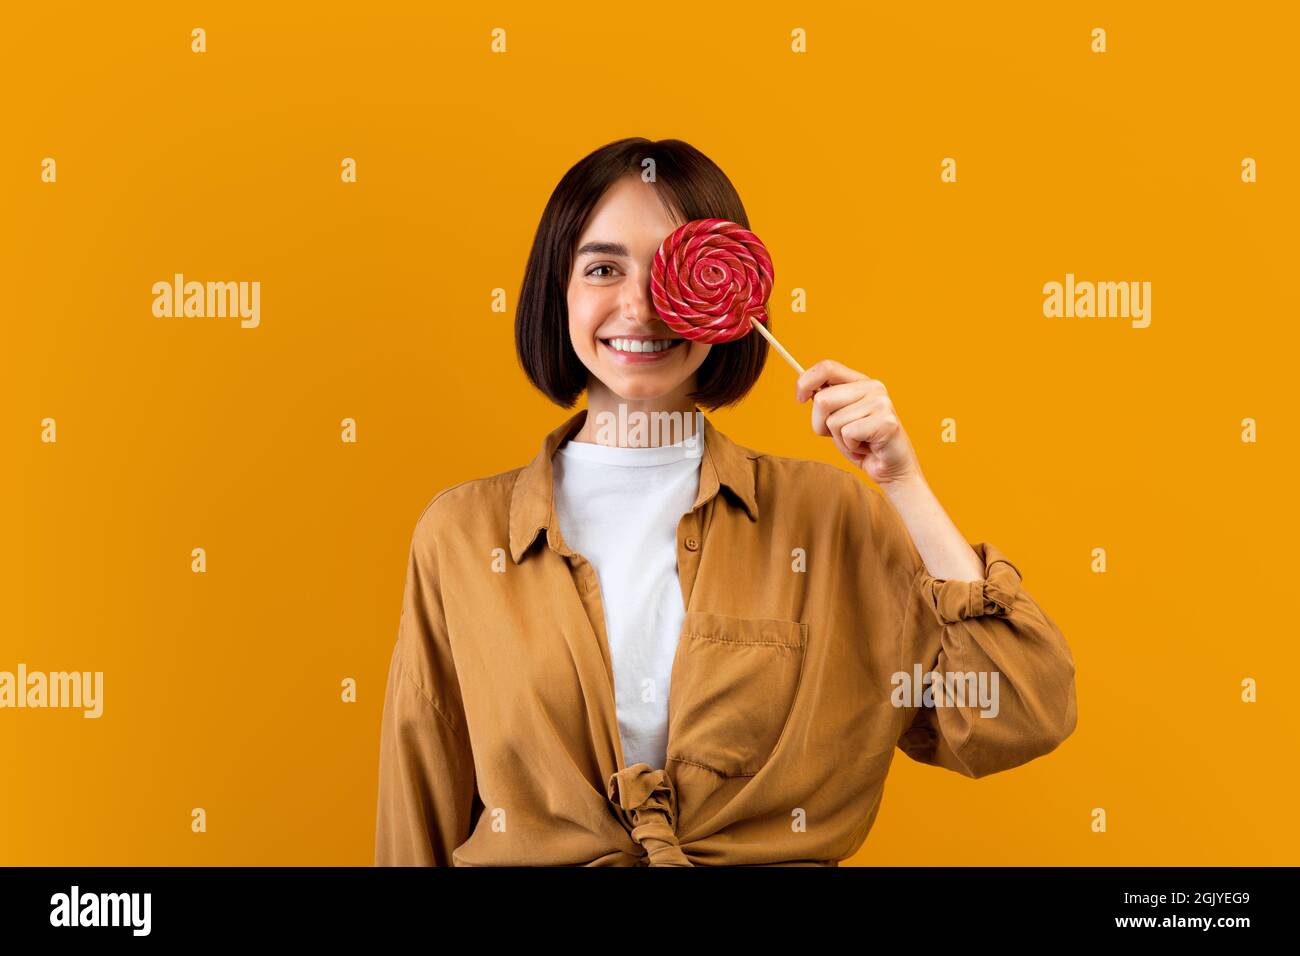 Sweet tooth concept. Happy young lady holding candy on stick, covering one eye with lollipop, yellow studio background Stock Photo